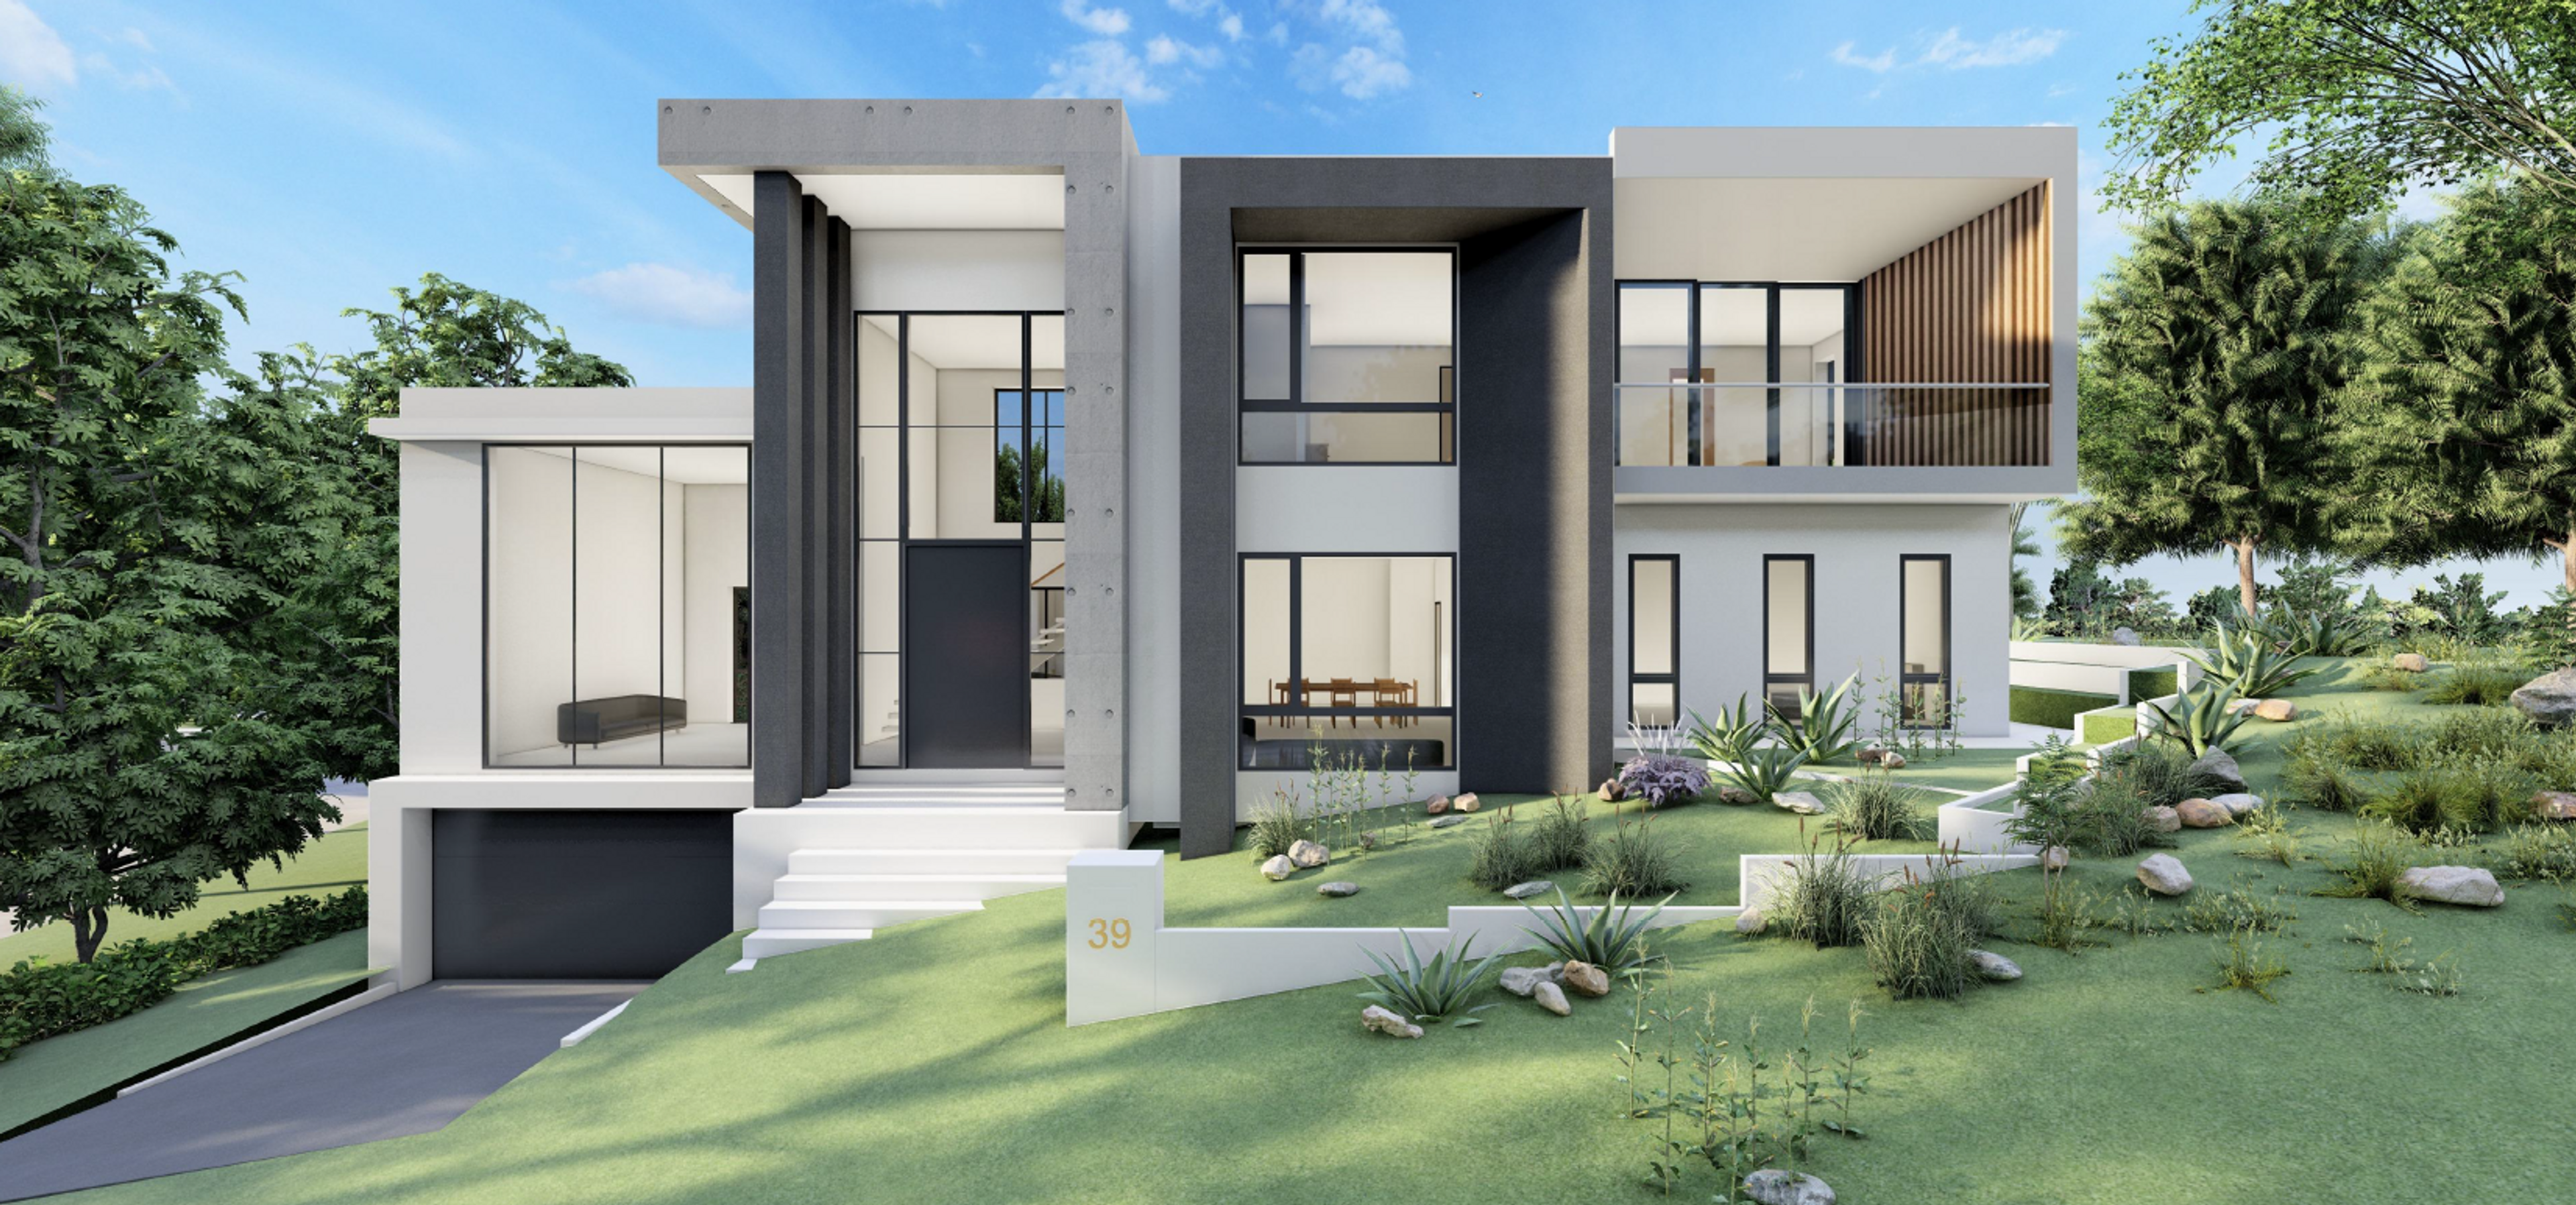 Ultramodern designer luxury home upcoming in North Kellyville, by Dezire Homes